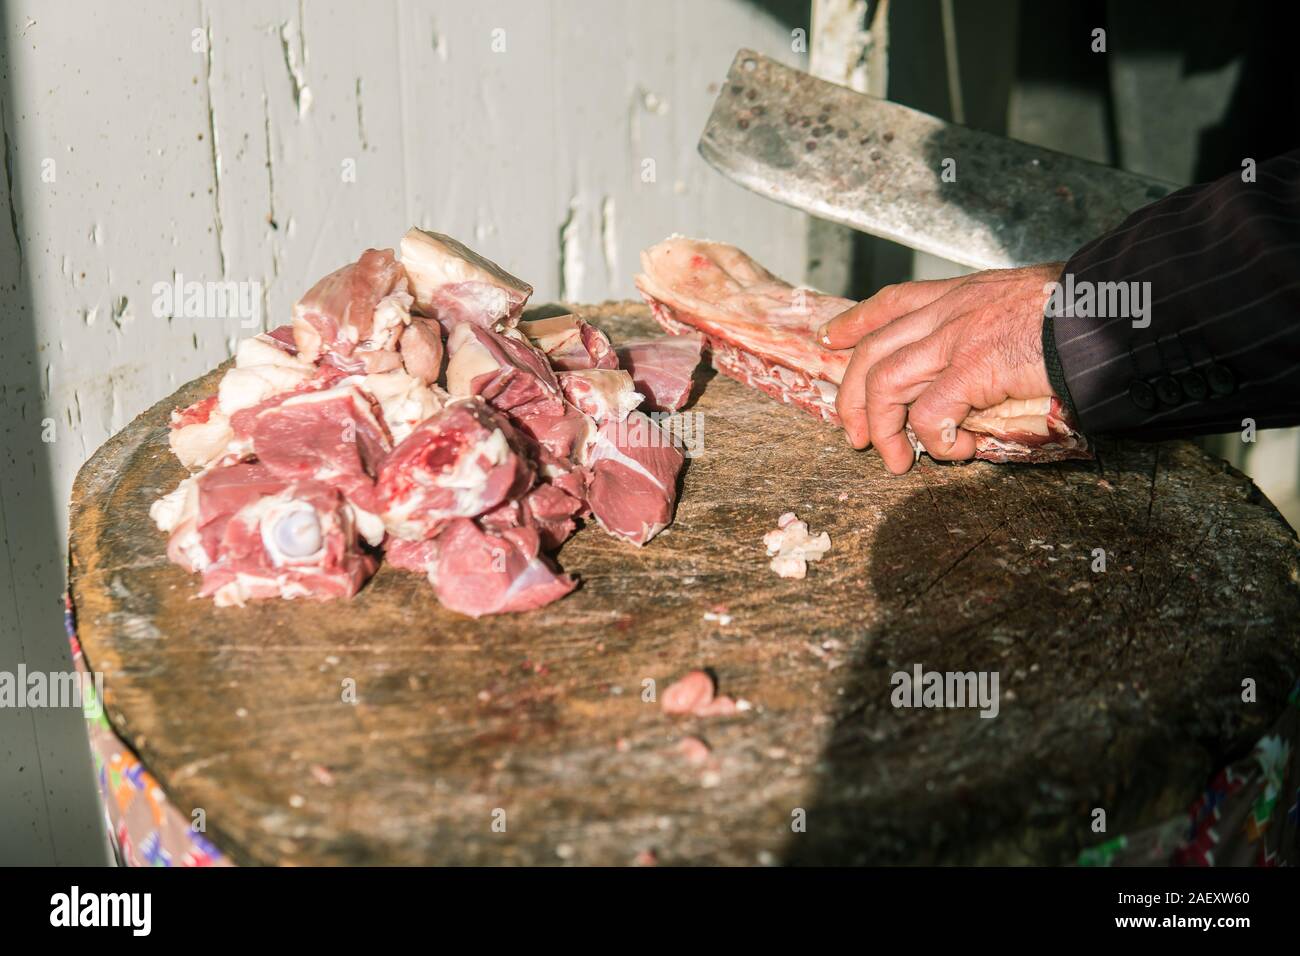 Meat or butcher shop at vintage or old market. Fresh meat on wooden stump. Stock Photo